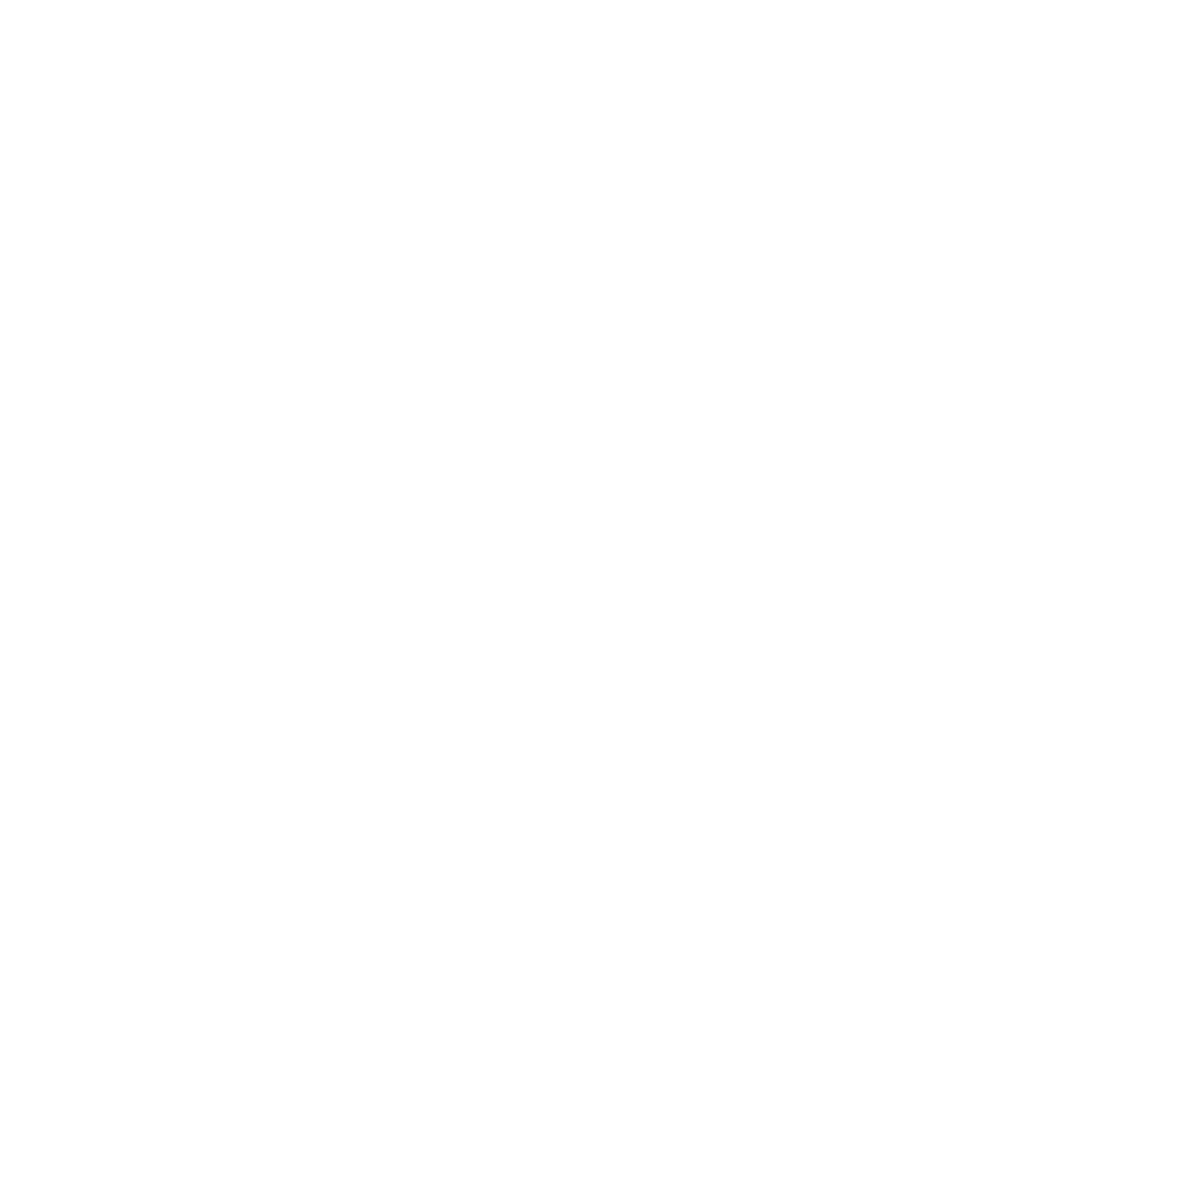 Cable TV PRO